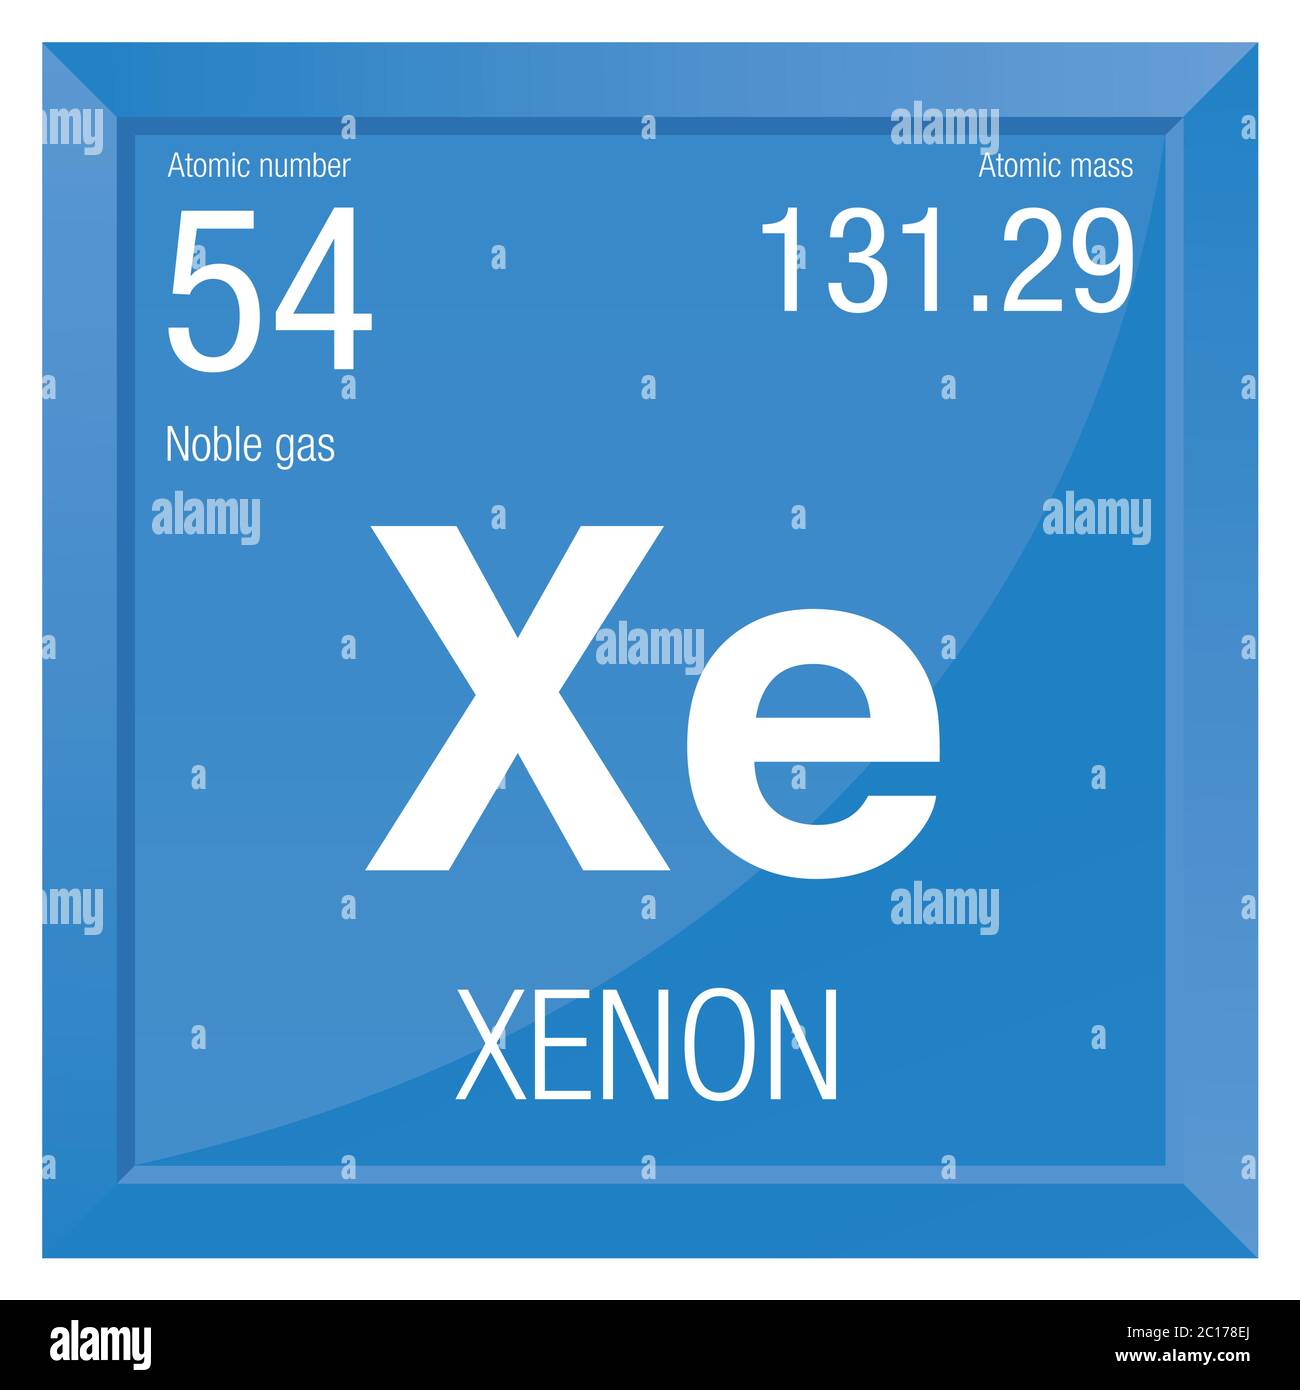 https://c8.alamy.com/comp/2C178EJ/xenon-symbol-element-number-54-of-the-periodic-table-of-the-elements-chemistry-square-frame-with-blue-background-2C178EJ.jpg